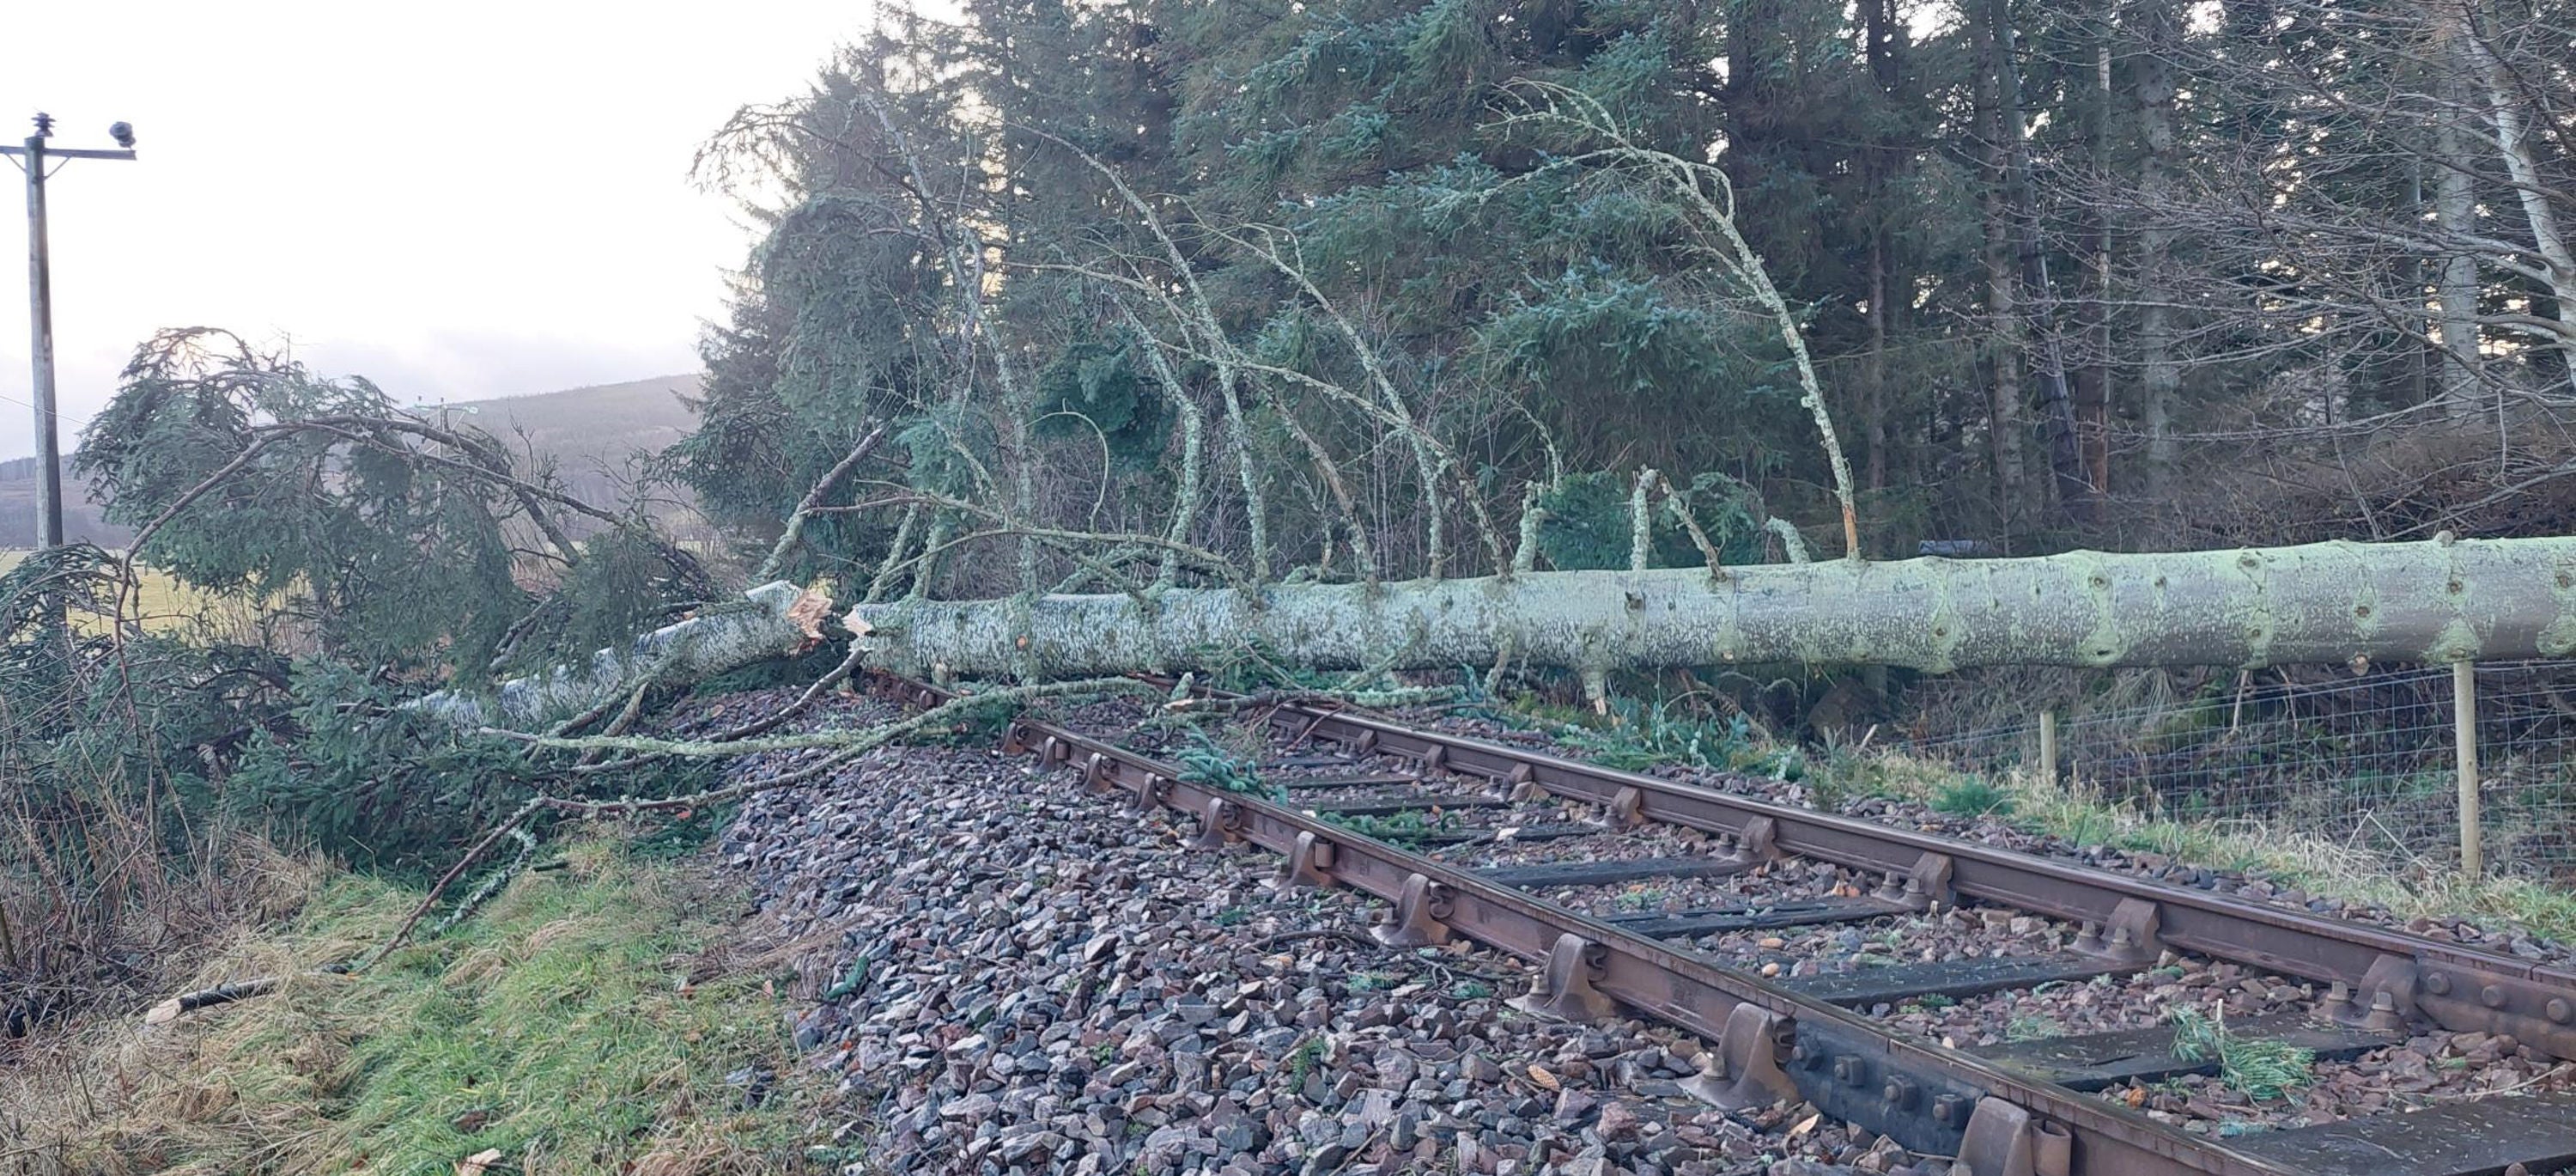 ScotRail has been dealing with fallen trees on railway tracks. It announced on Monday afternoon that all services will be suspended from 7pm on Tuesday.